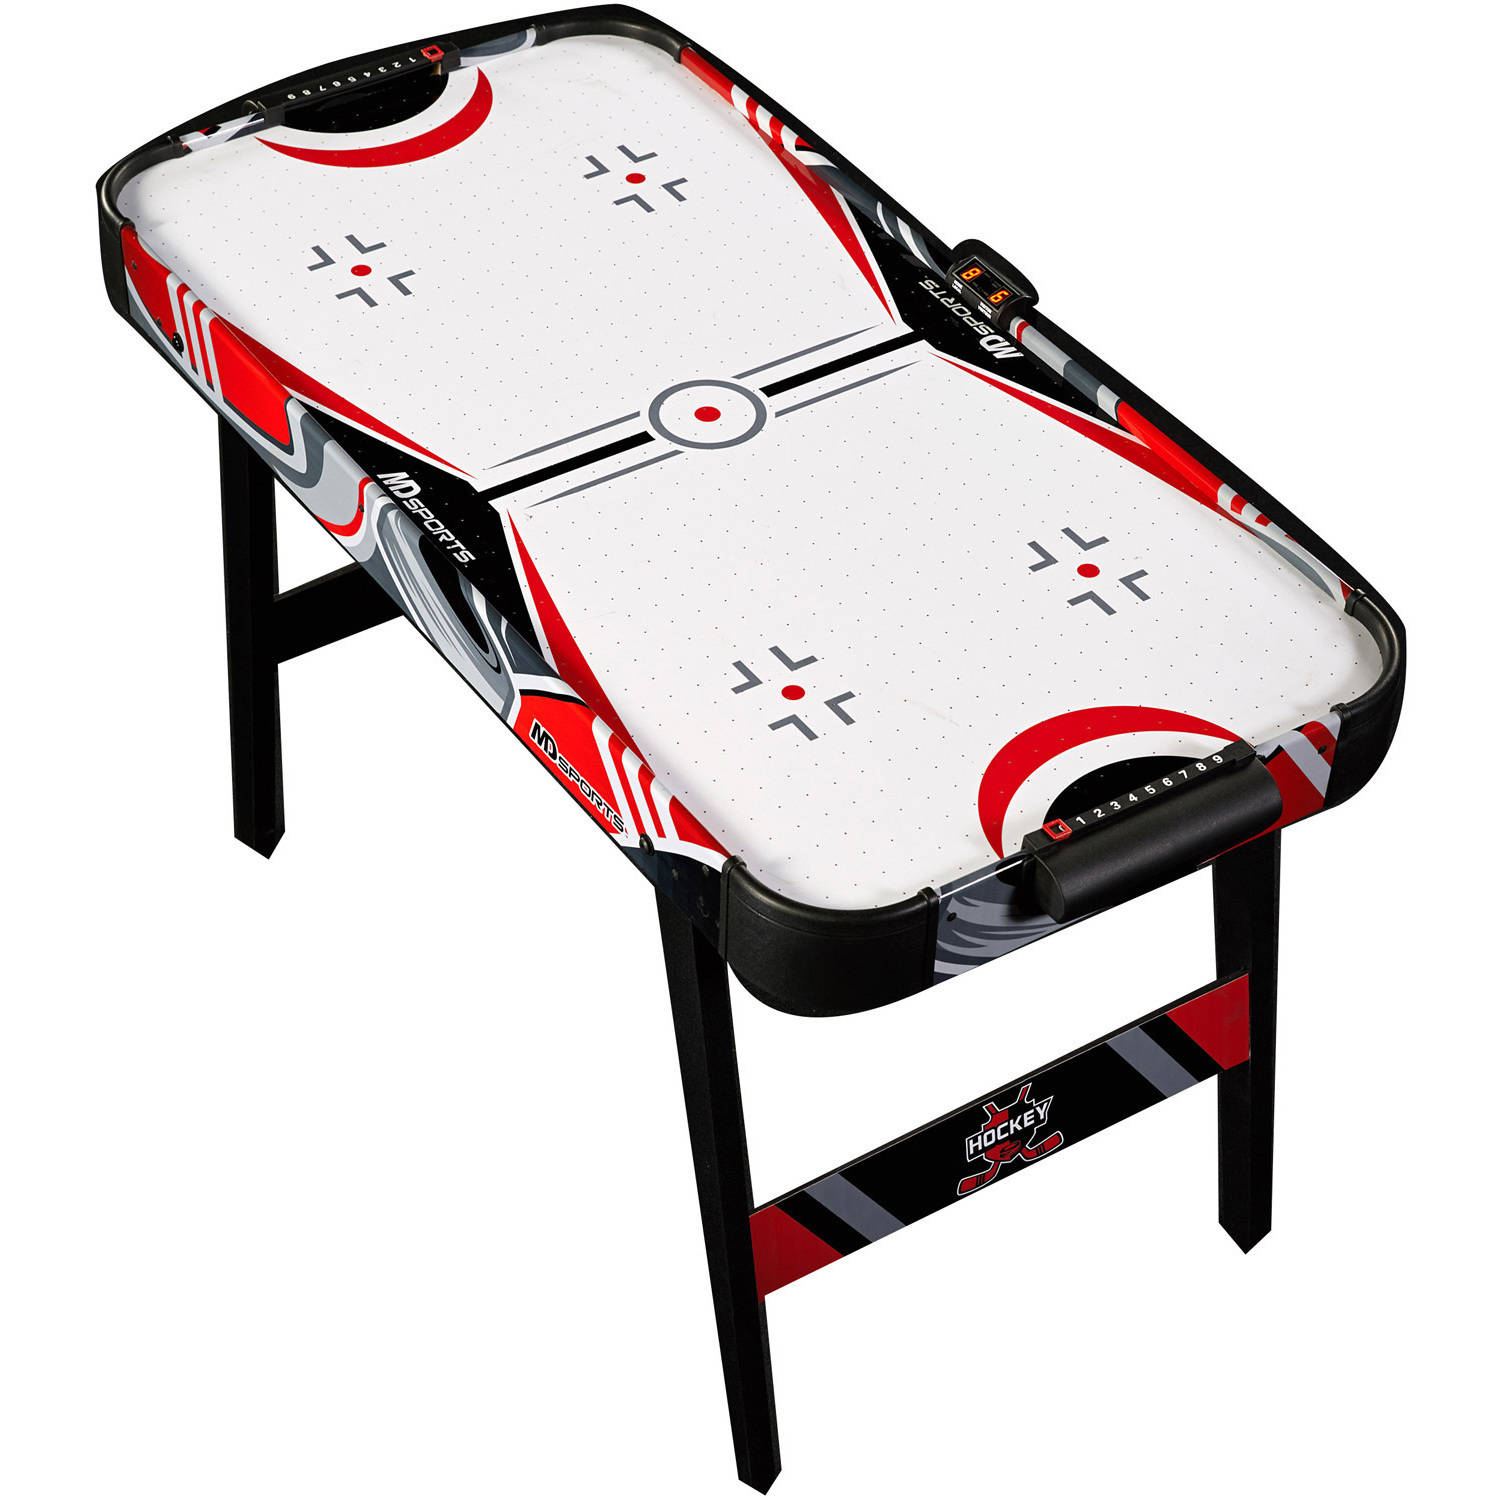 MD Sports Easy Assembly 48" Air Powered Hockey Table, Compact Storage/Foldable Legs, Red/Black - image 4 of 13